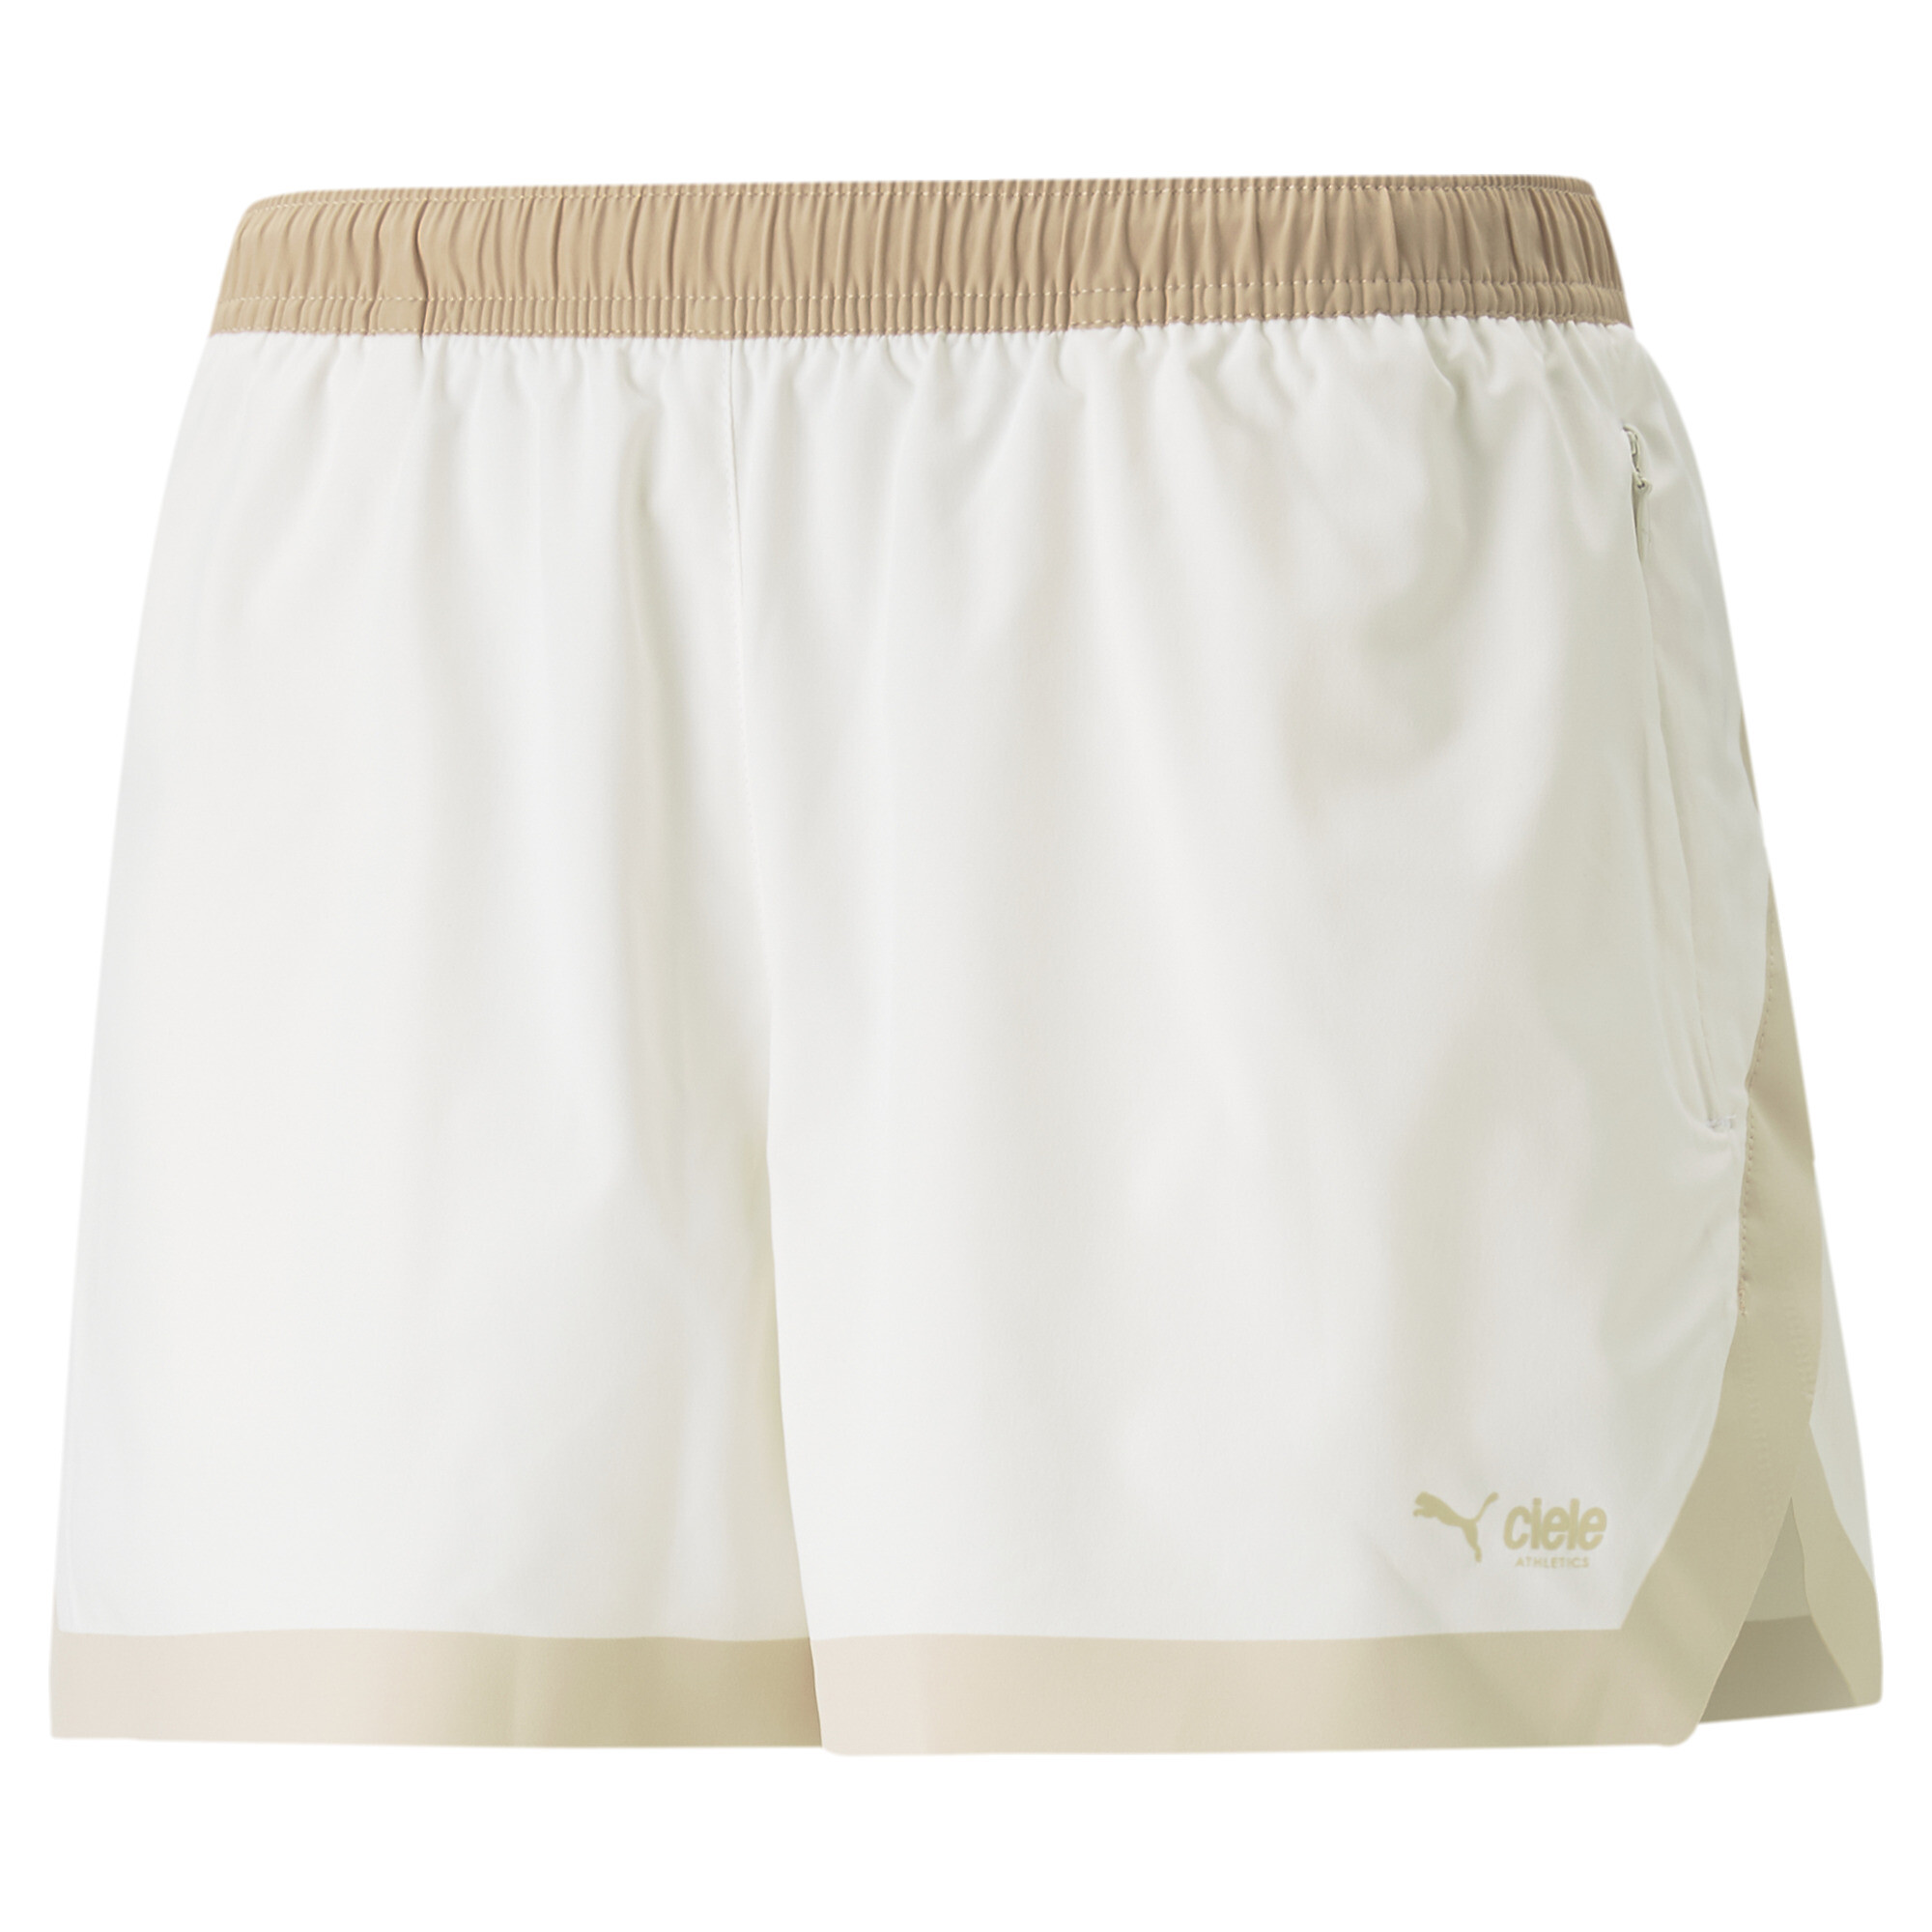 Women's PUMA X CIELE 3 Woven Running Shorts In 20 - White, Size Large